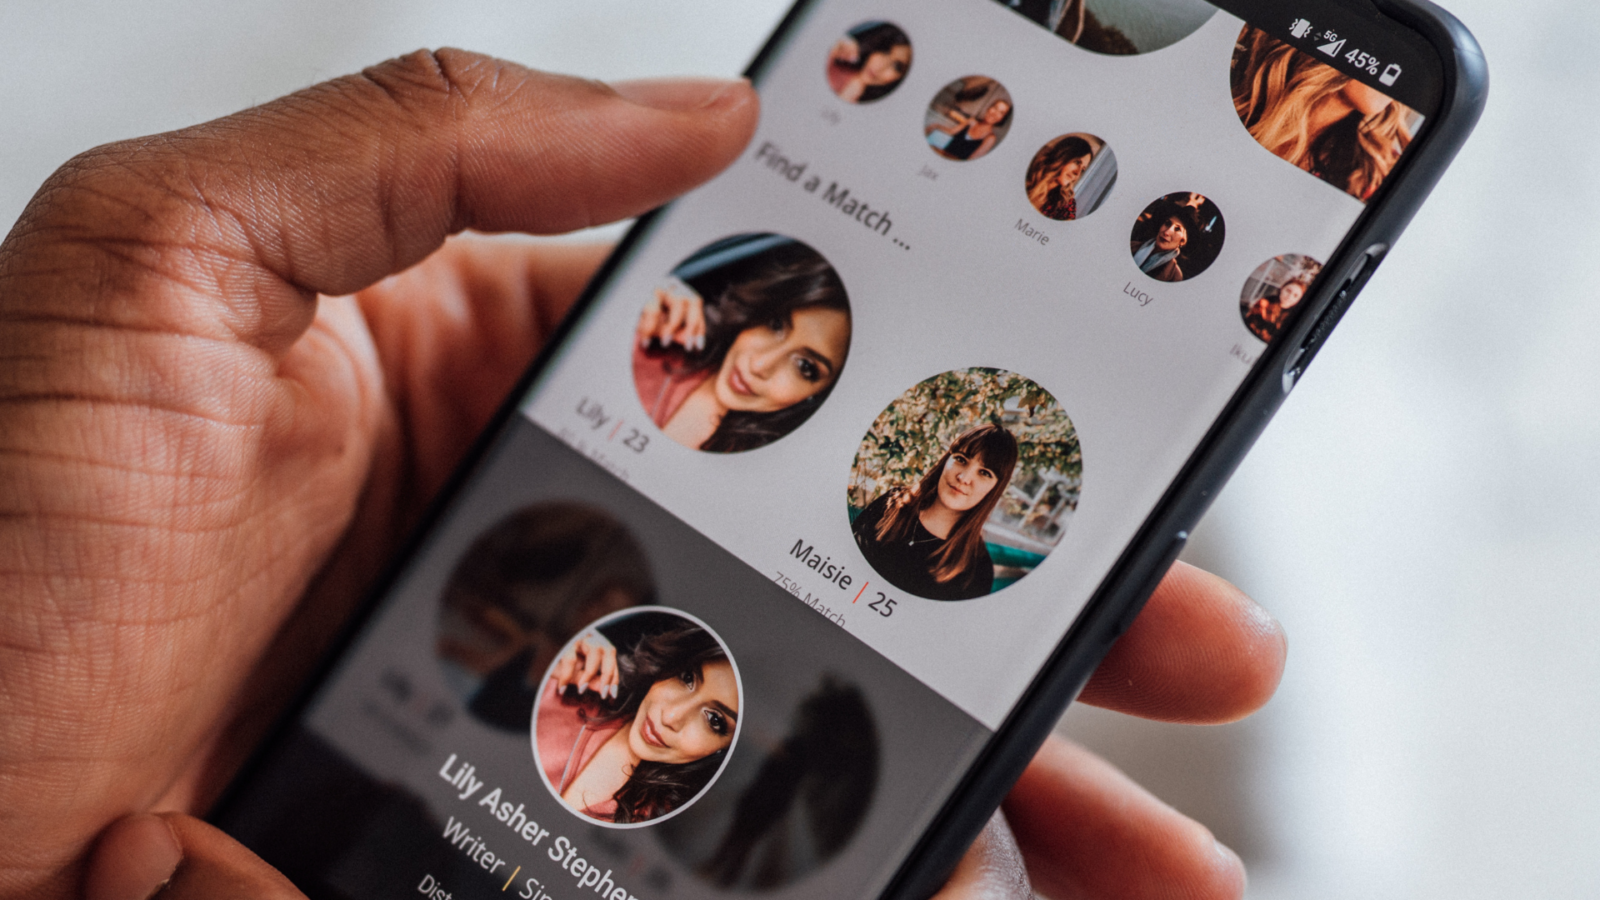 A man looking at the dating app conveys the modern approach to dating with little experience, highlighting the challenges and opportunities it presents.